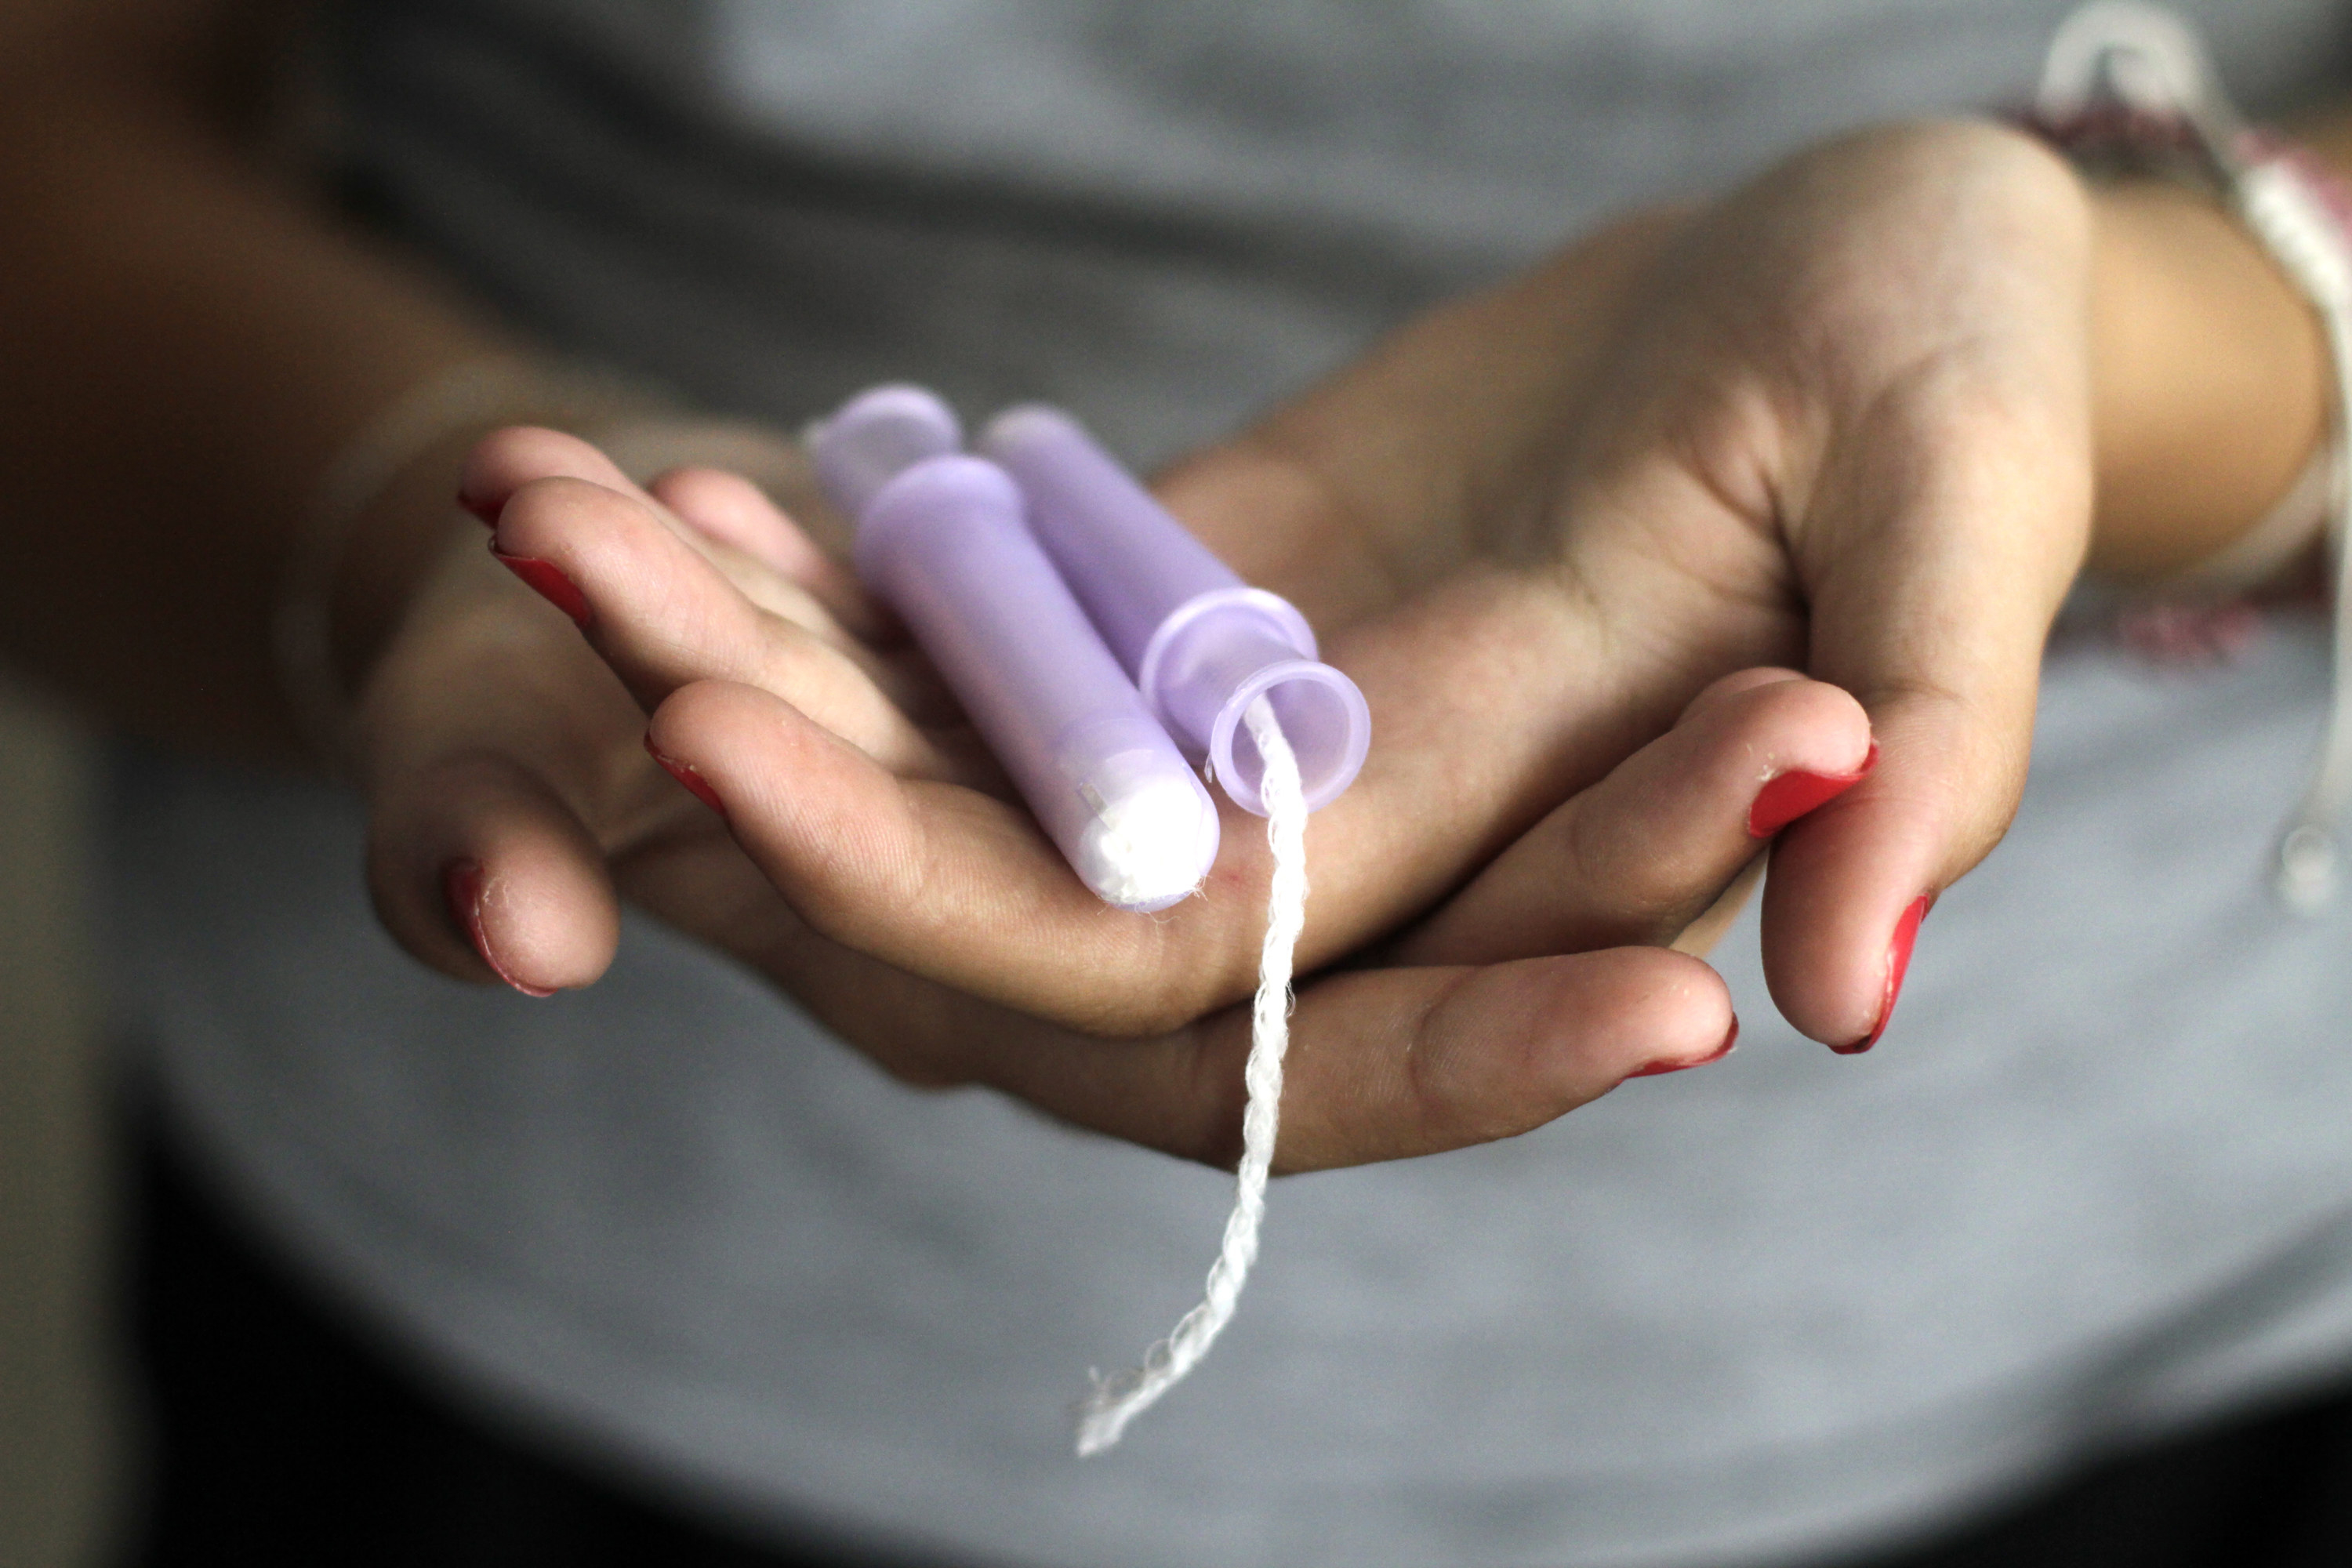 a woman holding tampons